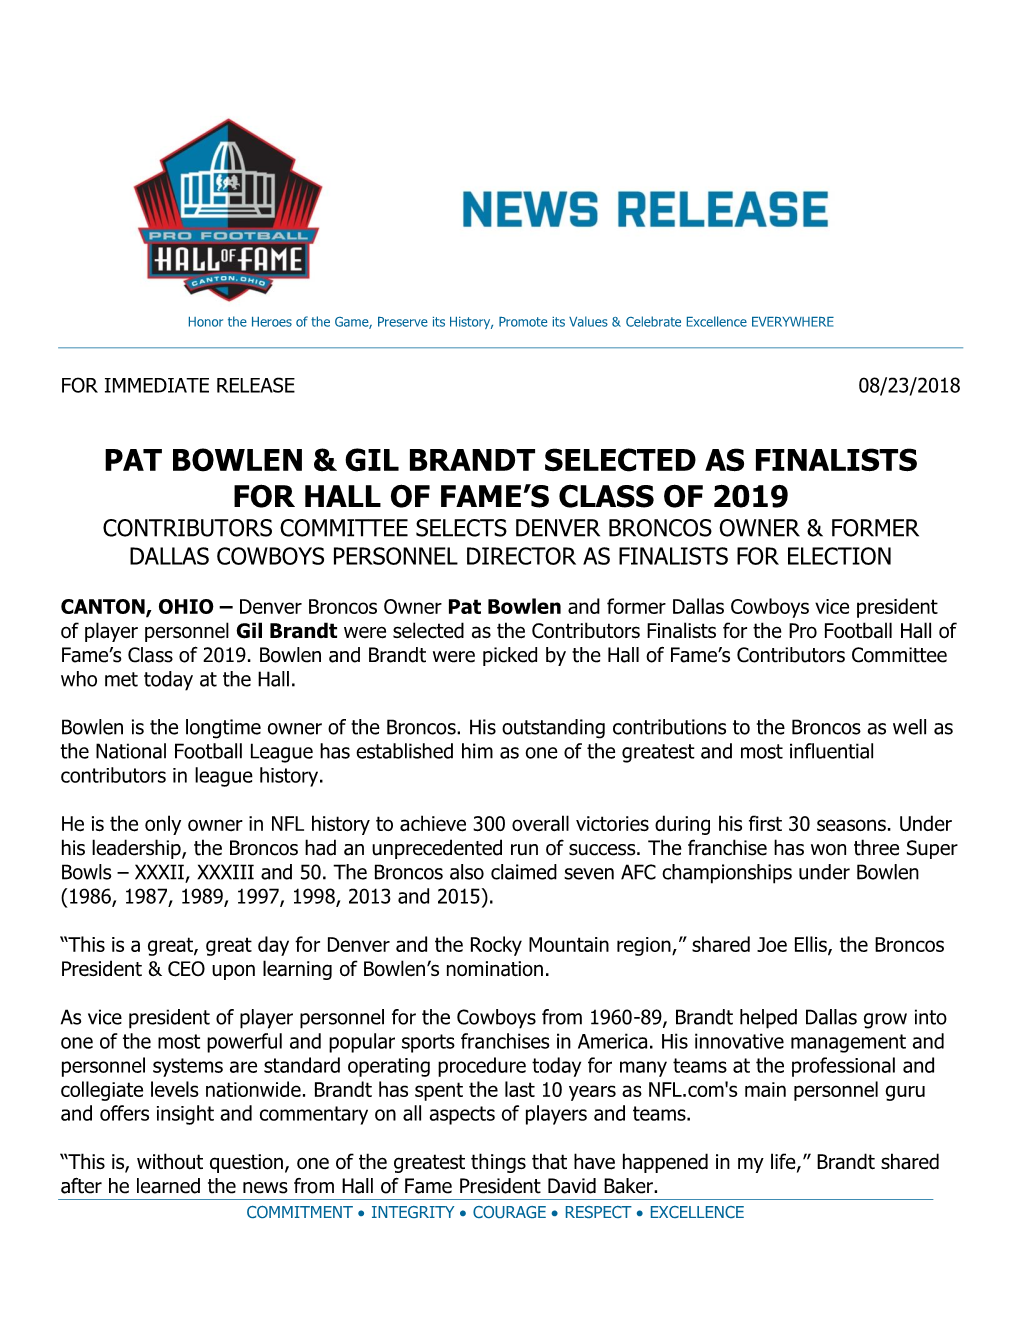 Pat Bowlen & Gil Brandt Selected As Finalists for Hall of Fame's Class of 2019